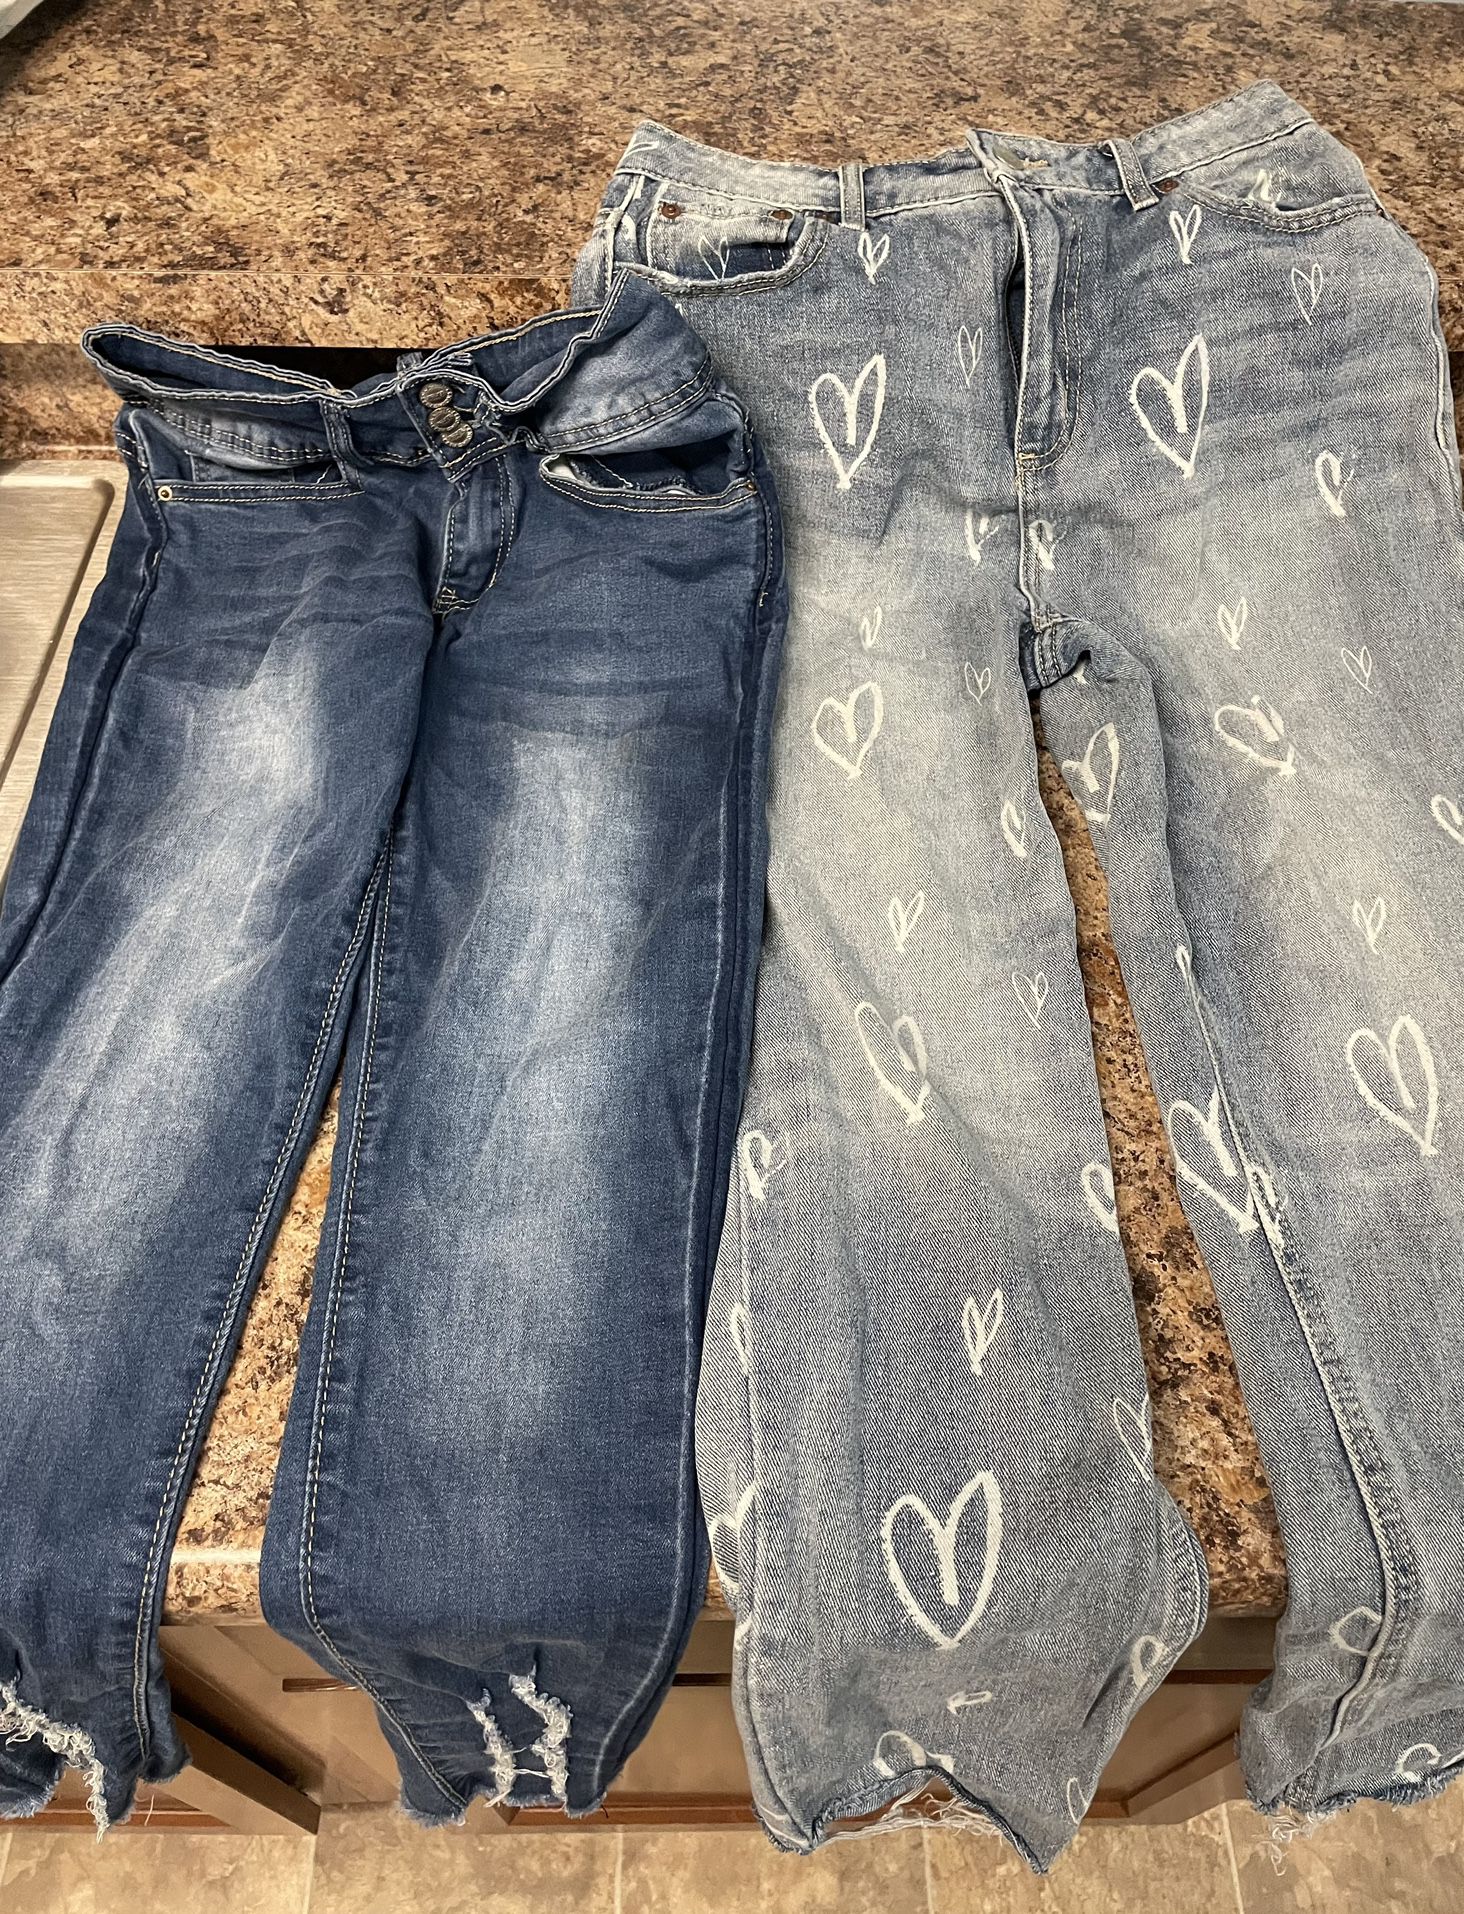 Jeans 2 For $15